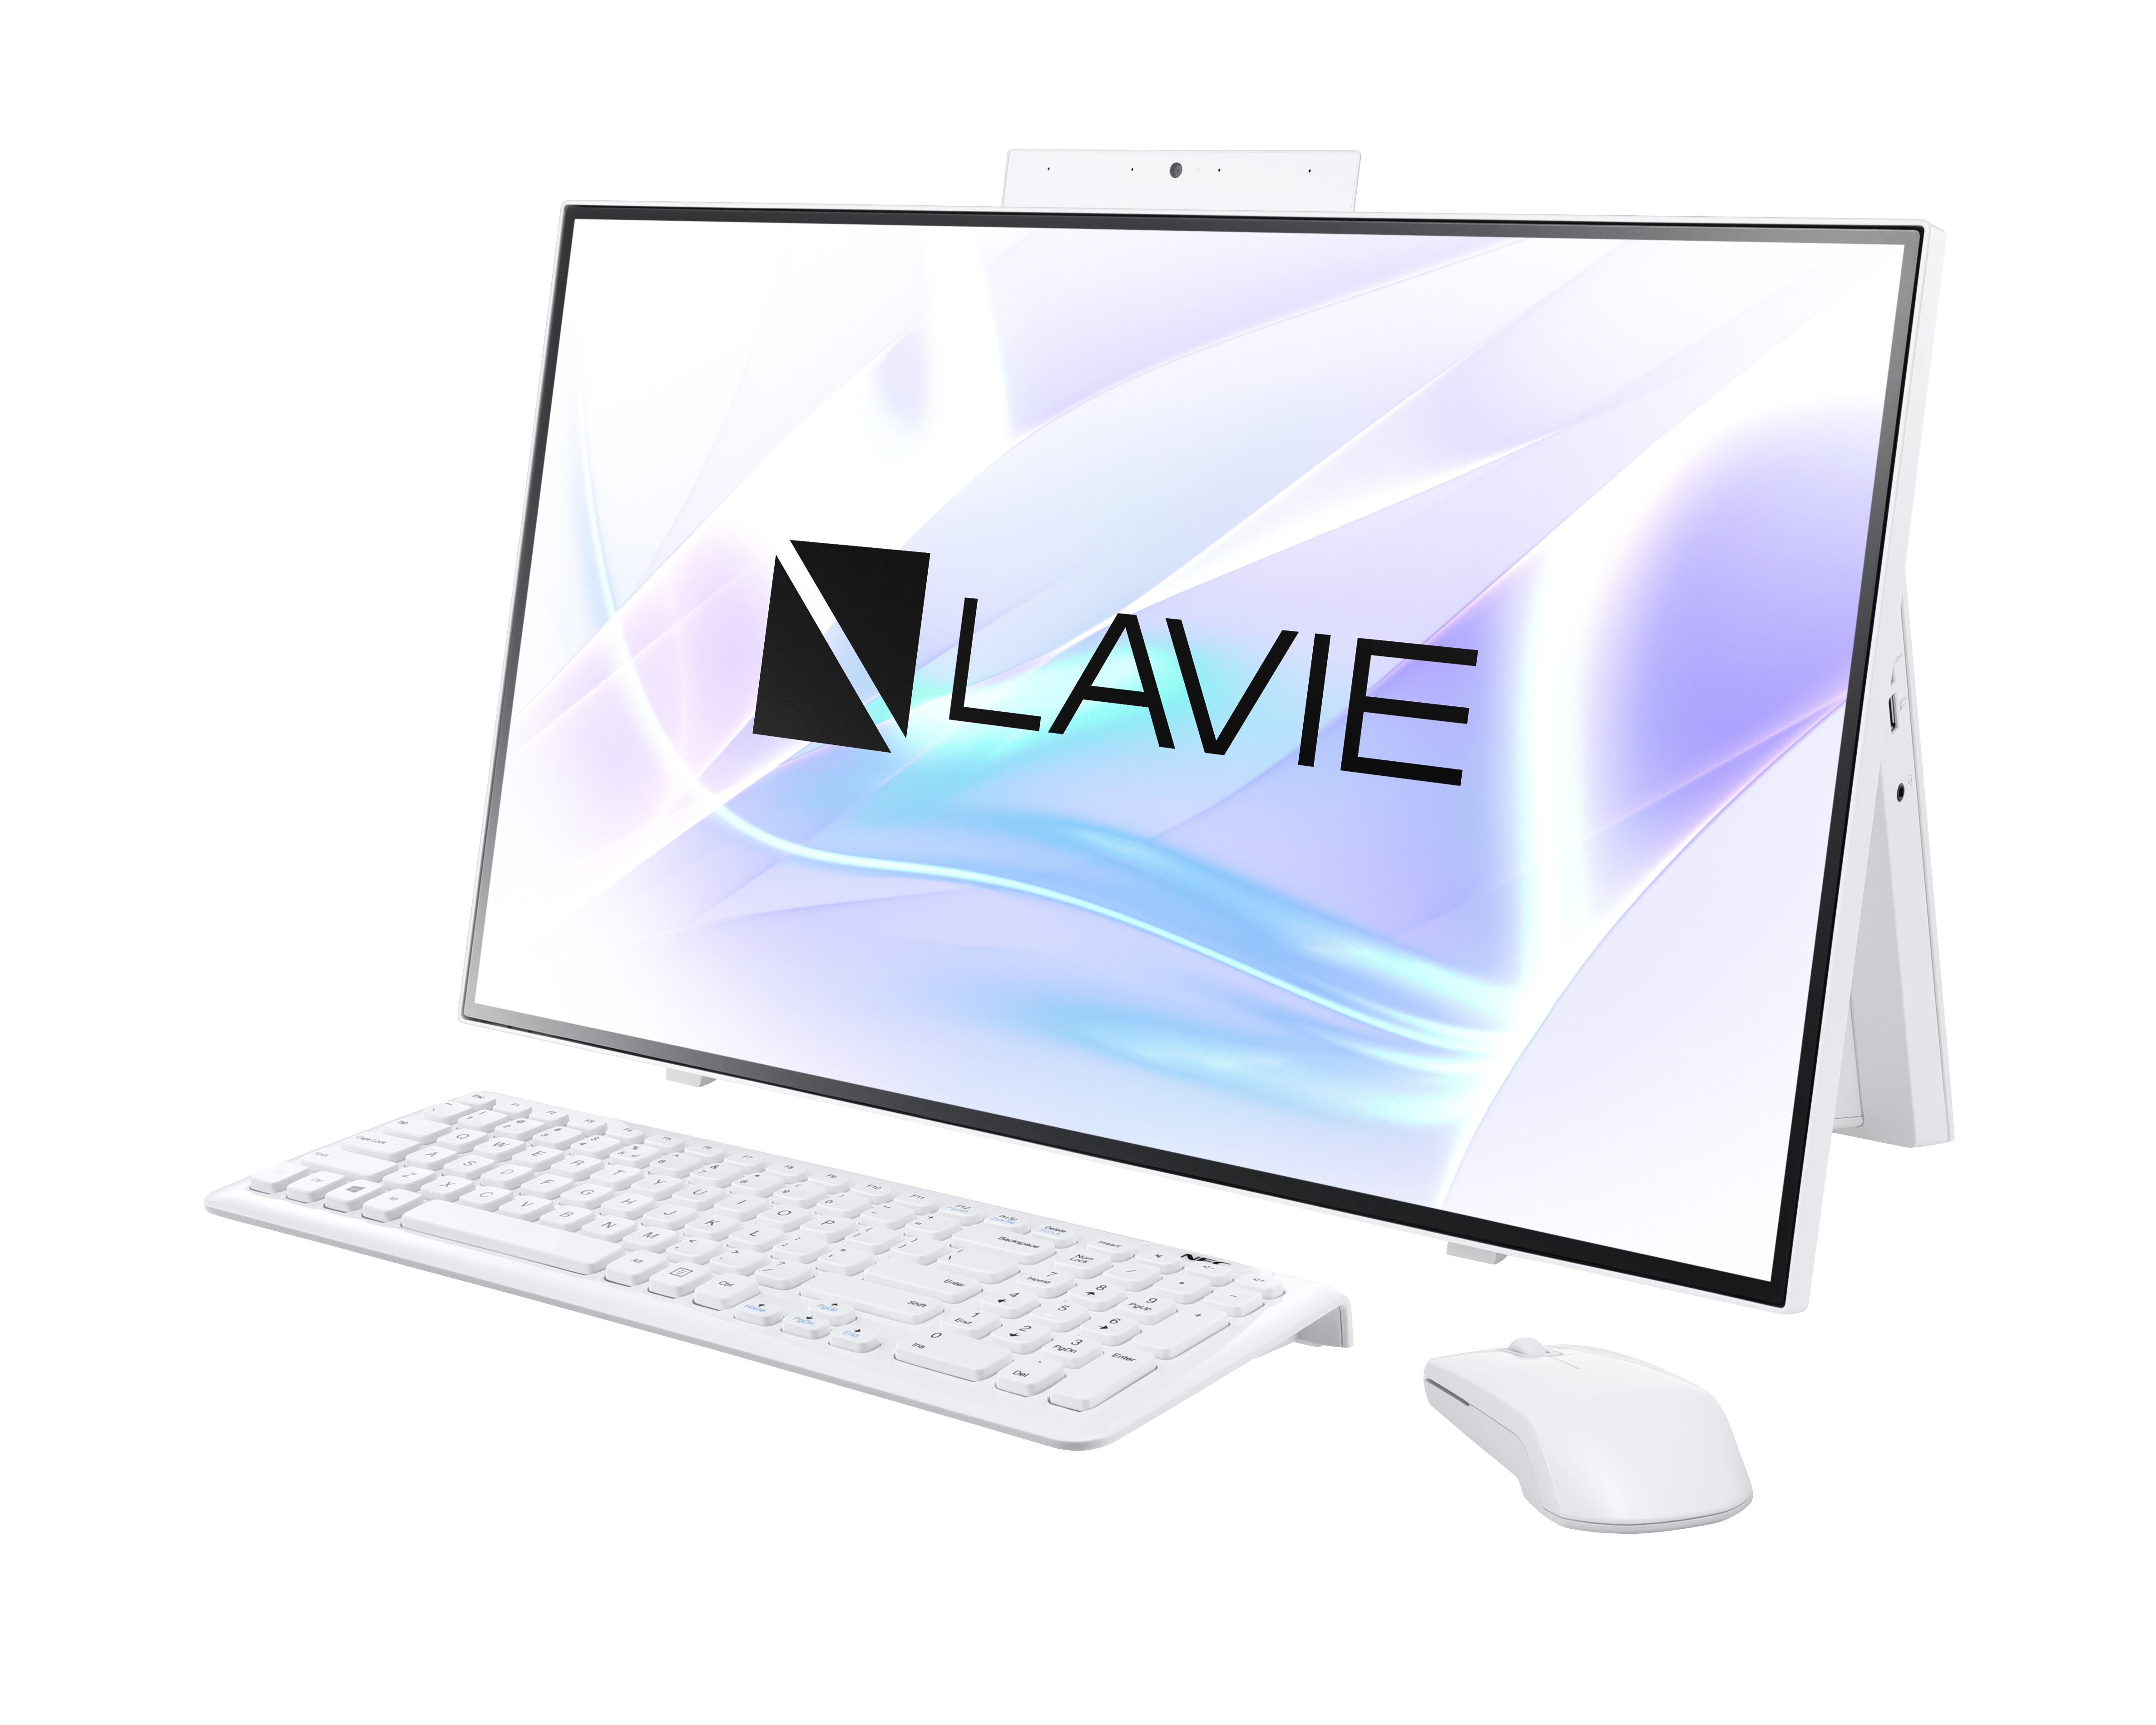 Photo of the LAVIE Home All-in-one, angled slightly left to show the monitor, keyboard and mouse